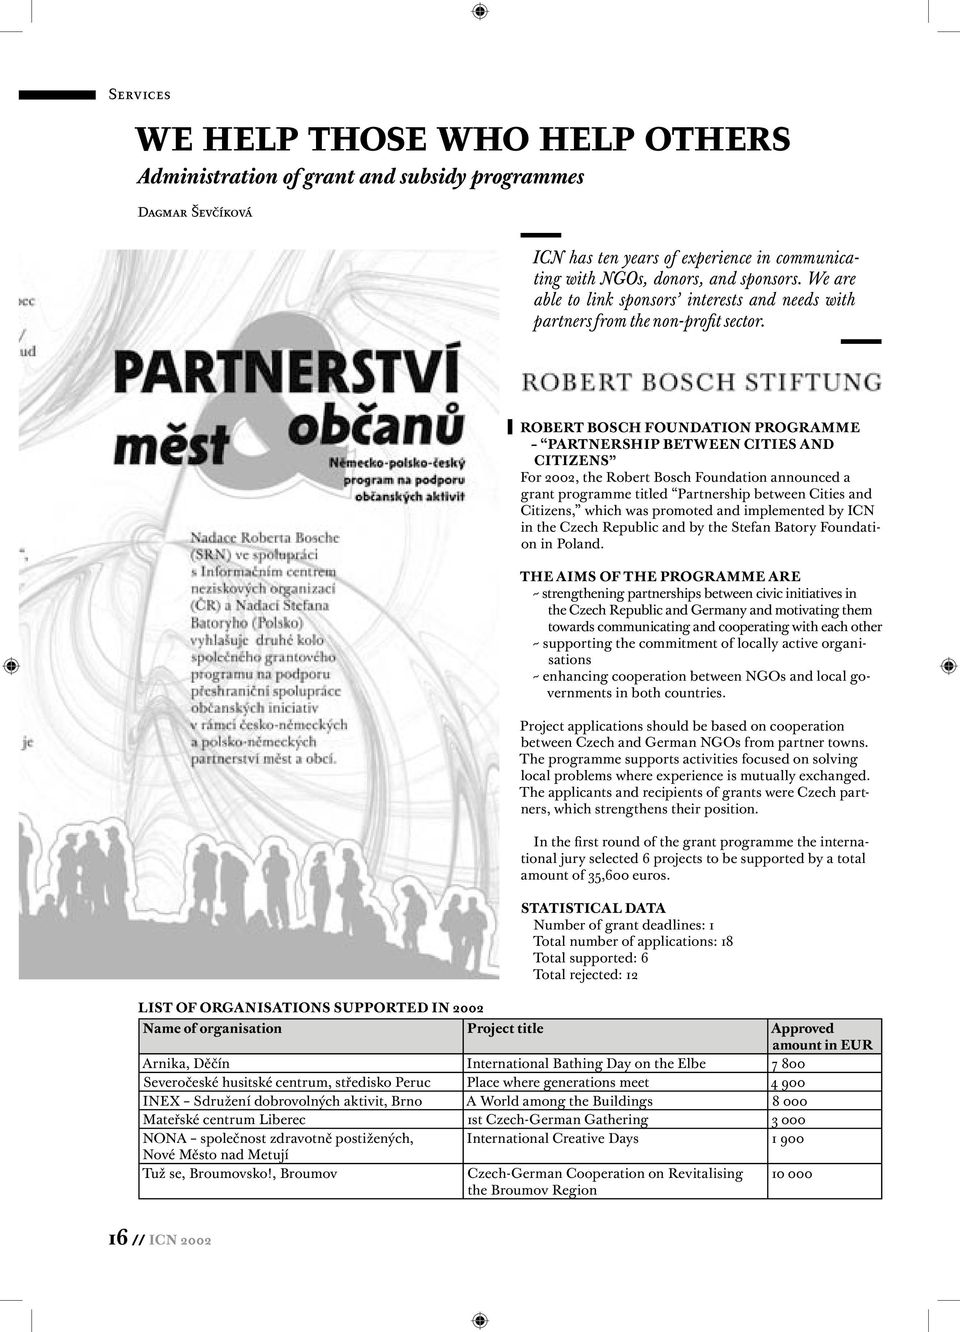 LIST OF ORGANISATIONS SUPPORTED IN 2002 ROBERT BOSCH FOUNDATION PROGRAMME PARTNERSHIP BETWEEN CITIES AND CITIZENS For 2002, the Robert Bosch Foundation announced a grant programme titled Partnership